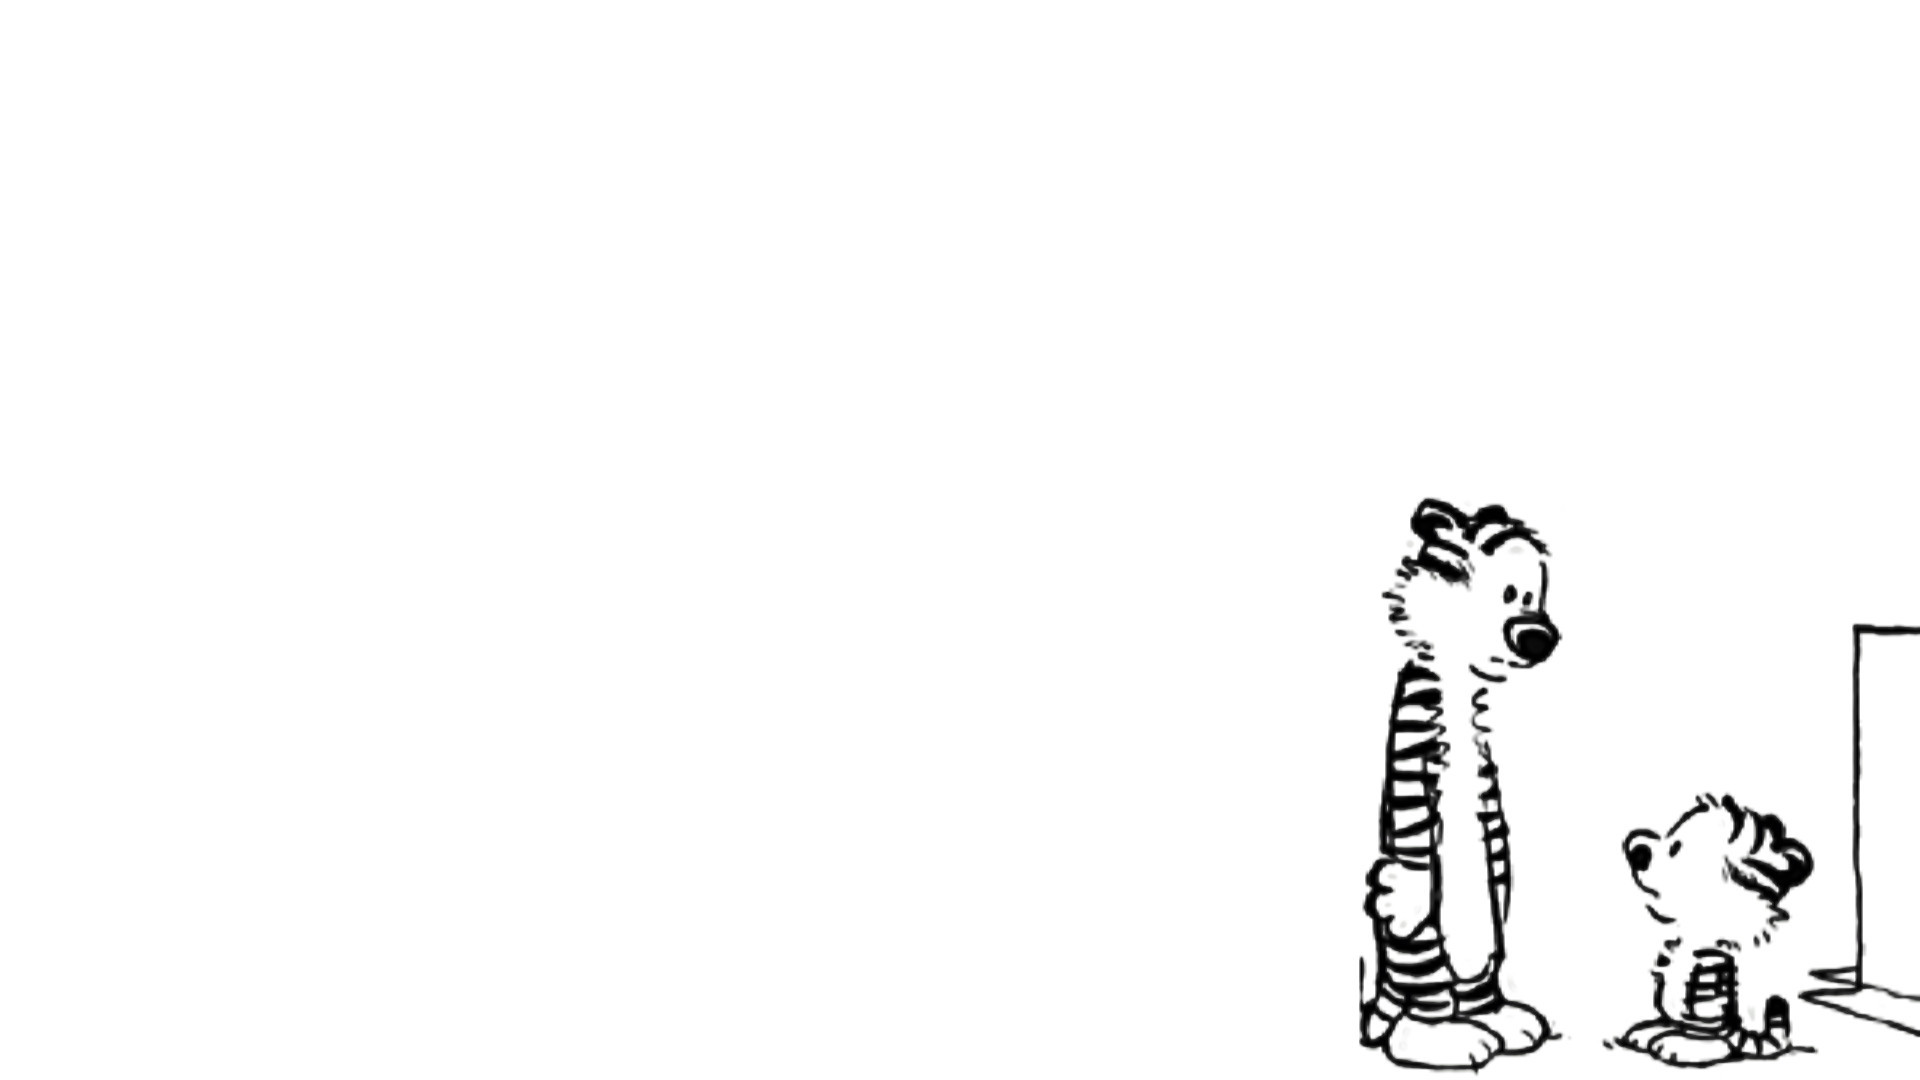 Download Hobbes Calvin  Hobbes wallpapers for mobile phone free  Hobbes Calvin  Hobbes HD pictures